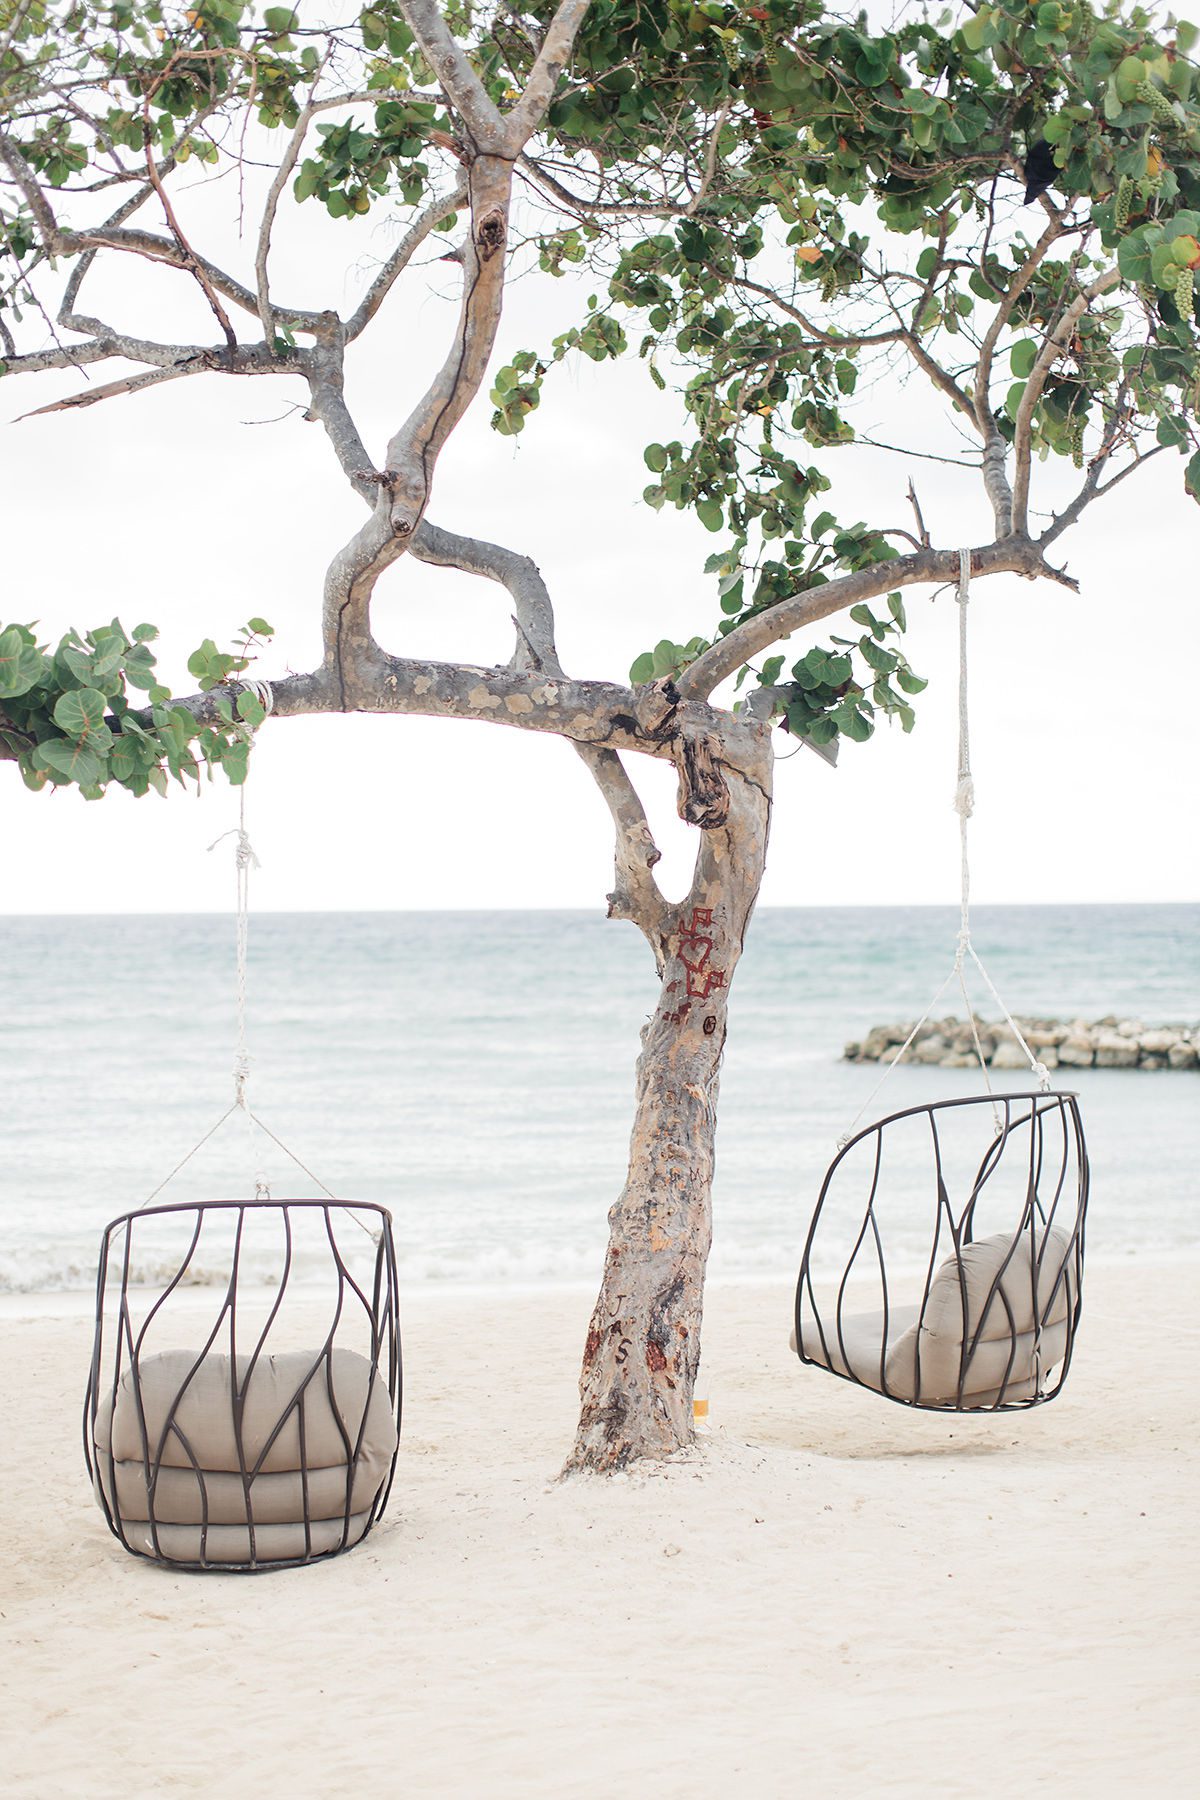 Wicker Chairs on the beach